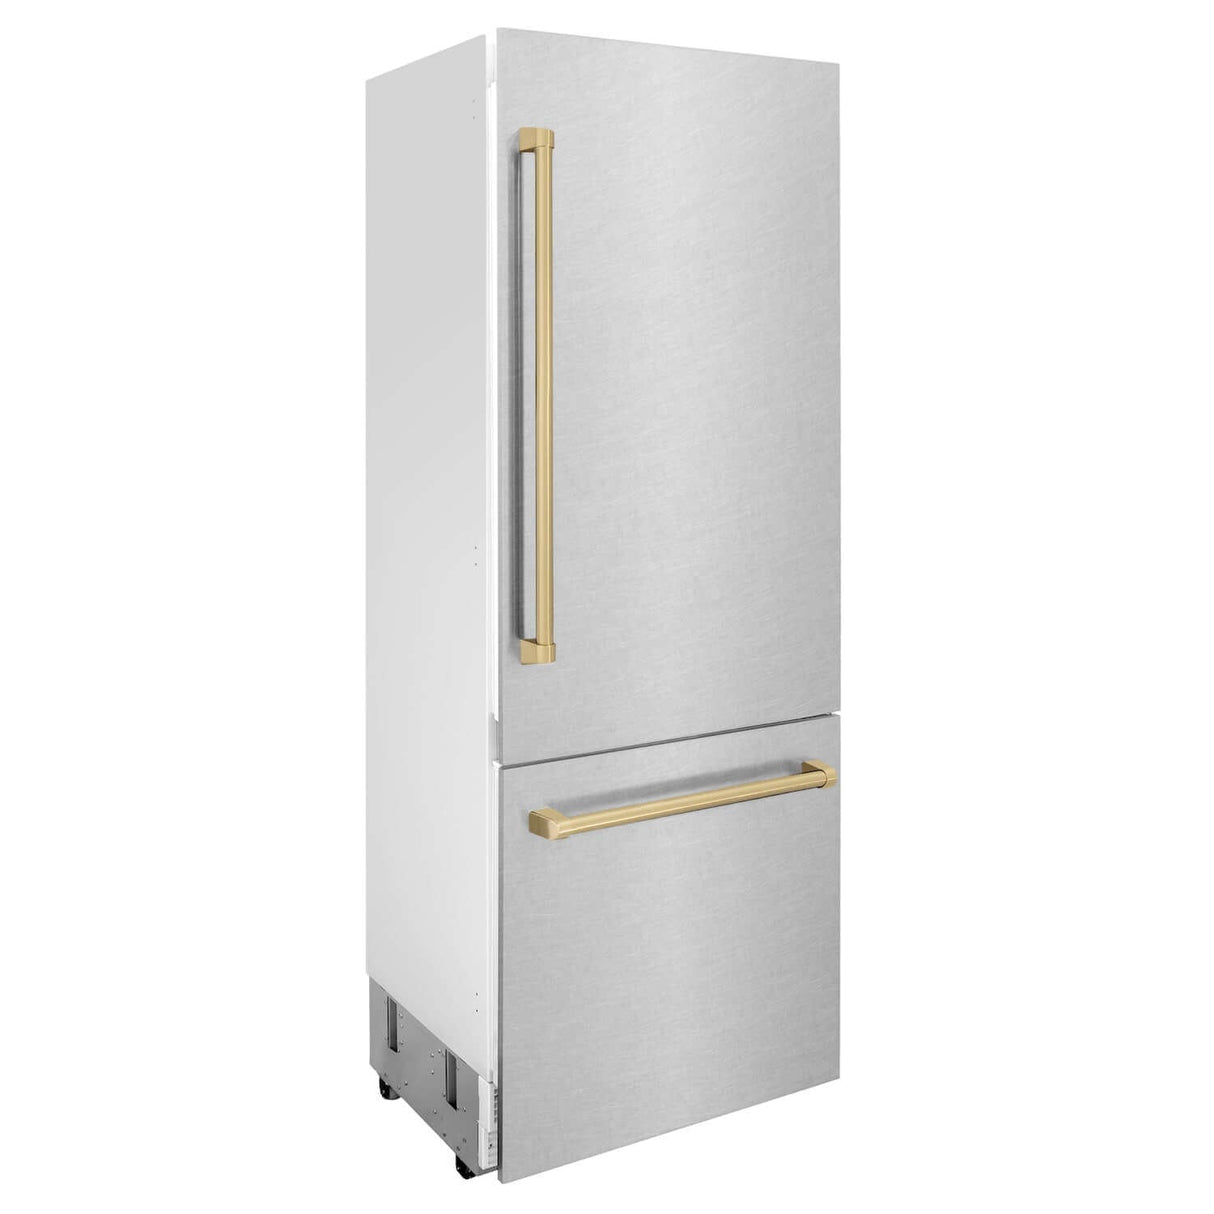 ZLINE Autograph Edition 30 in. 16.1 cu. ft. Built-in 2-Door Bottom Freezer Refrigerator with Internal Water and Ice Dispenser in Fingerprint Resistant Stainless Steel with Champagne Bronze Accents (RBIVZ-SN-30-CB)